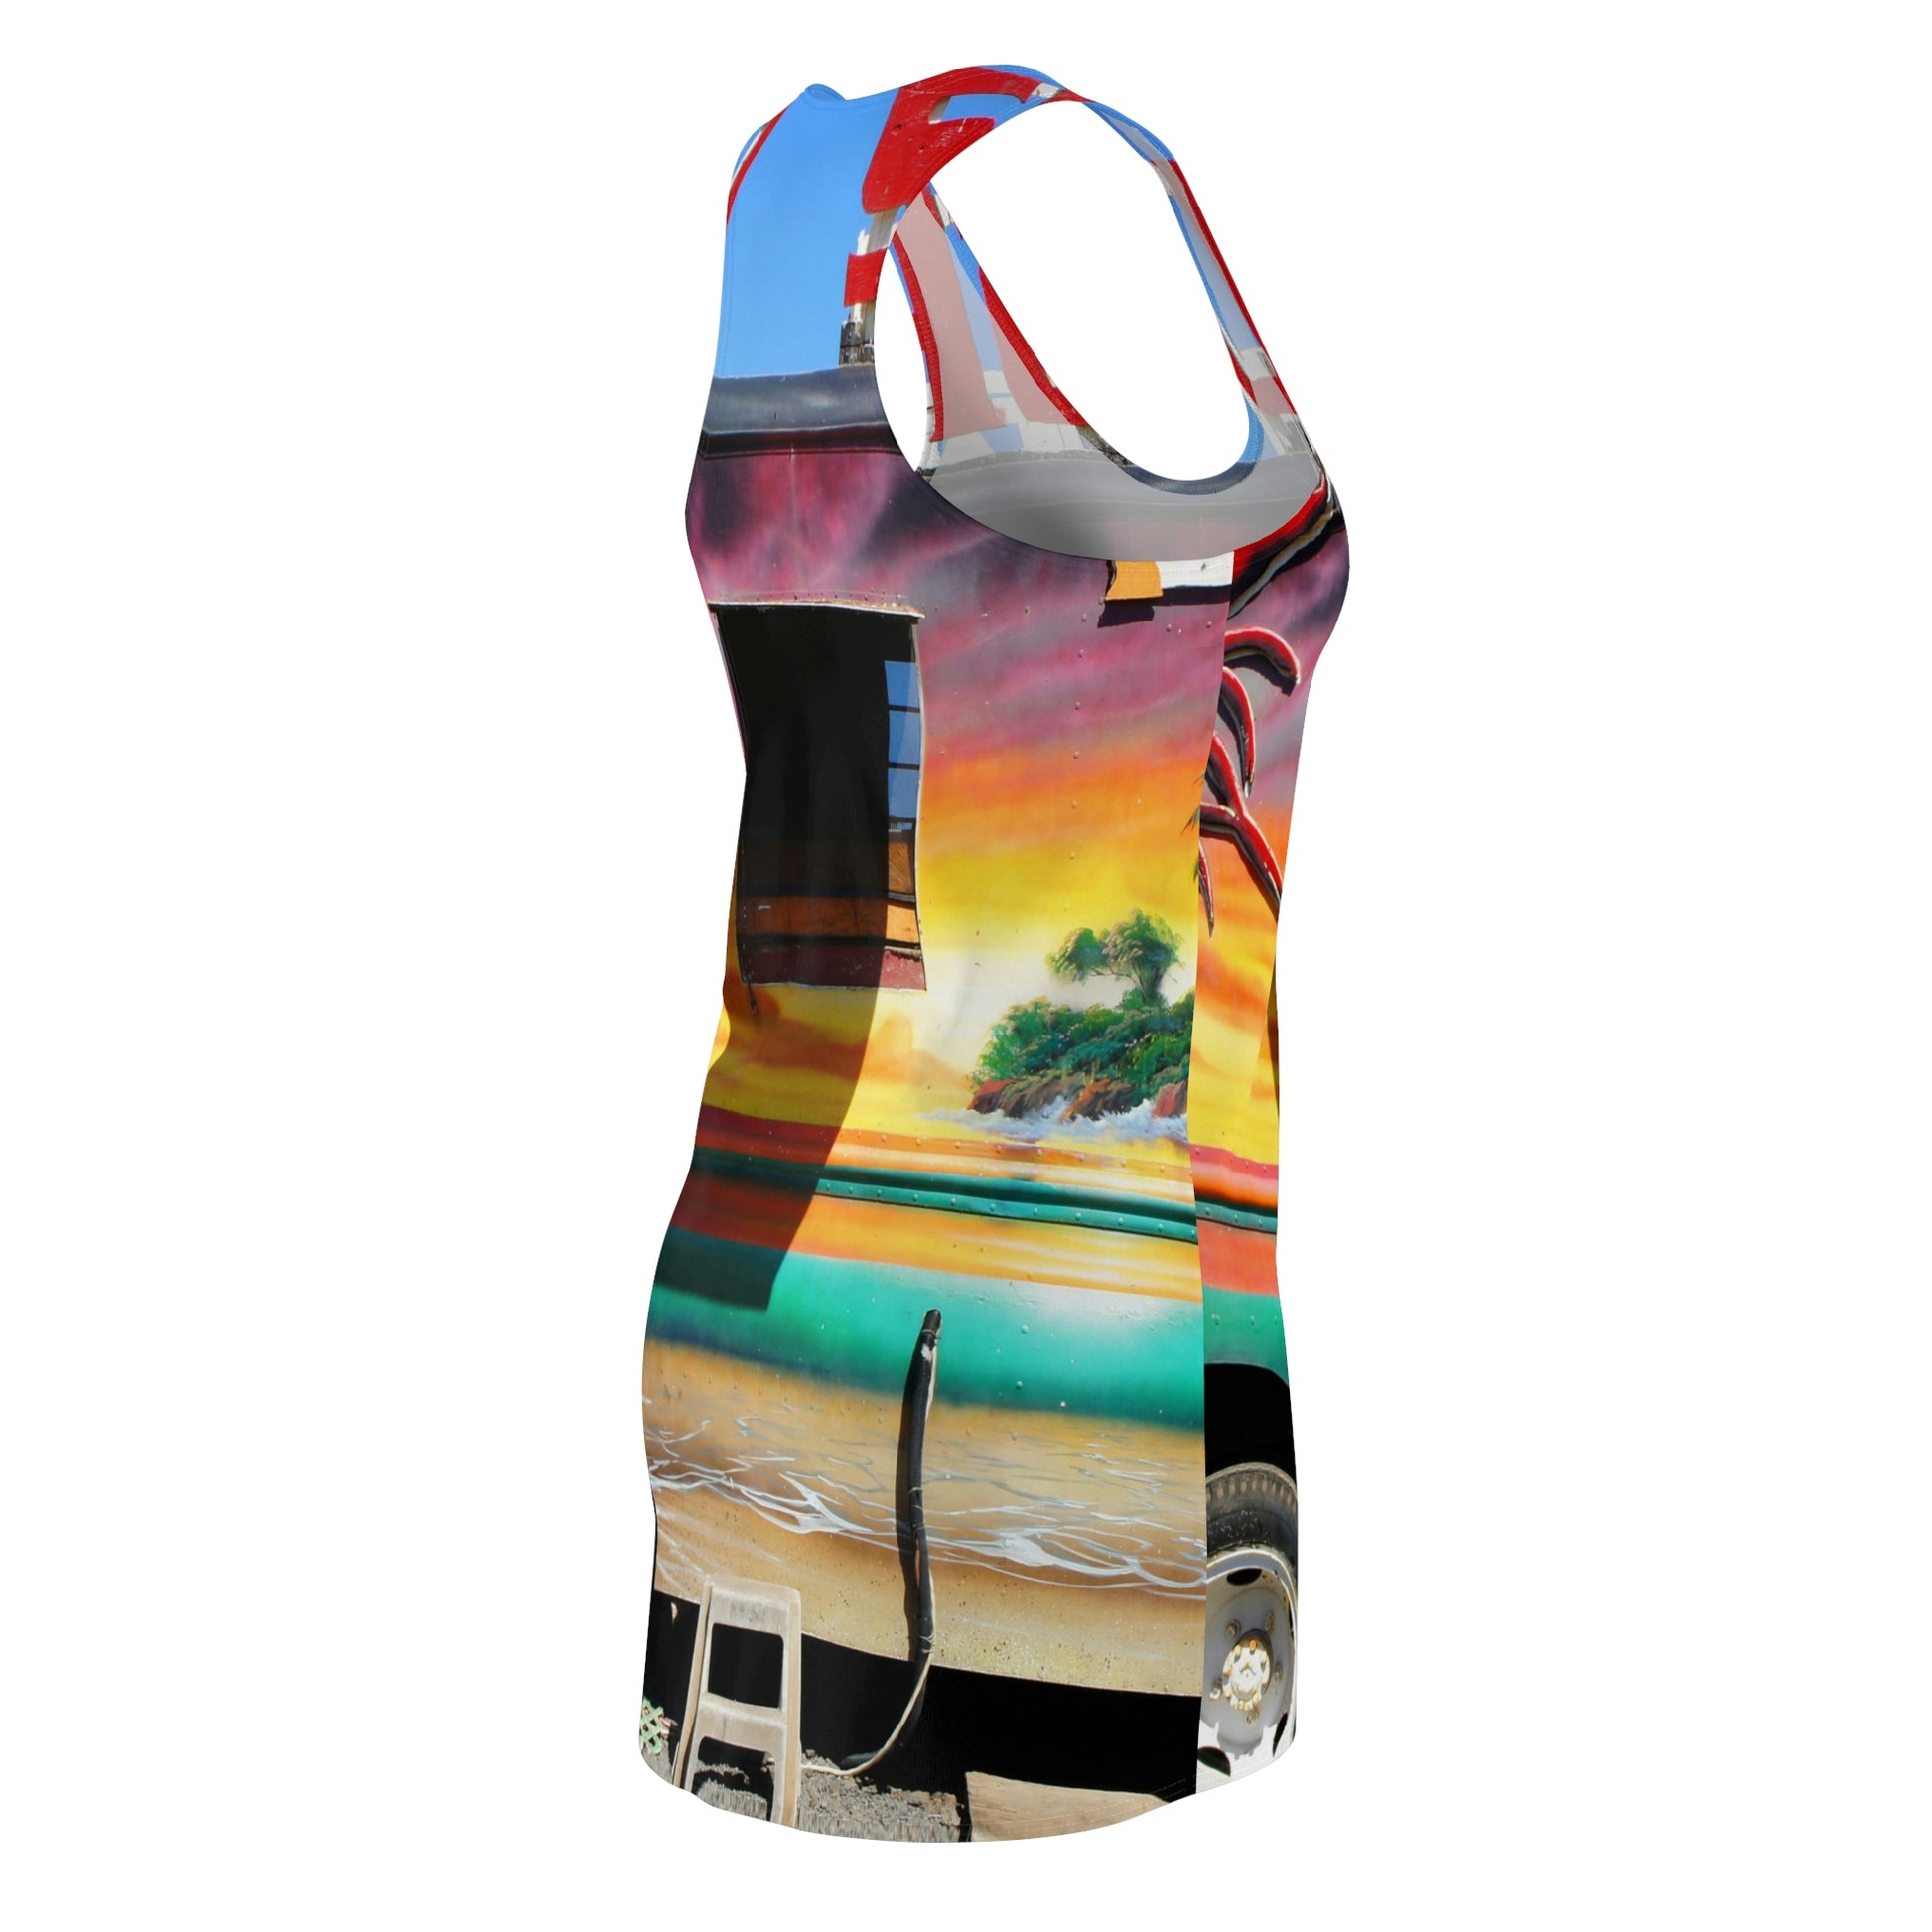 Island Love - Women's All-Over Print Racerback Dress - Fry1Productions